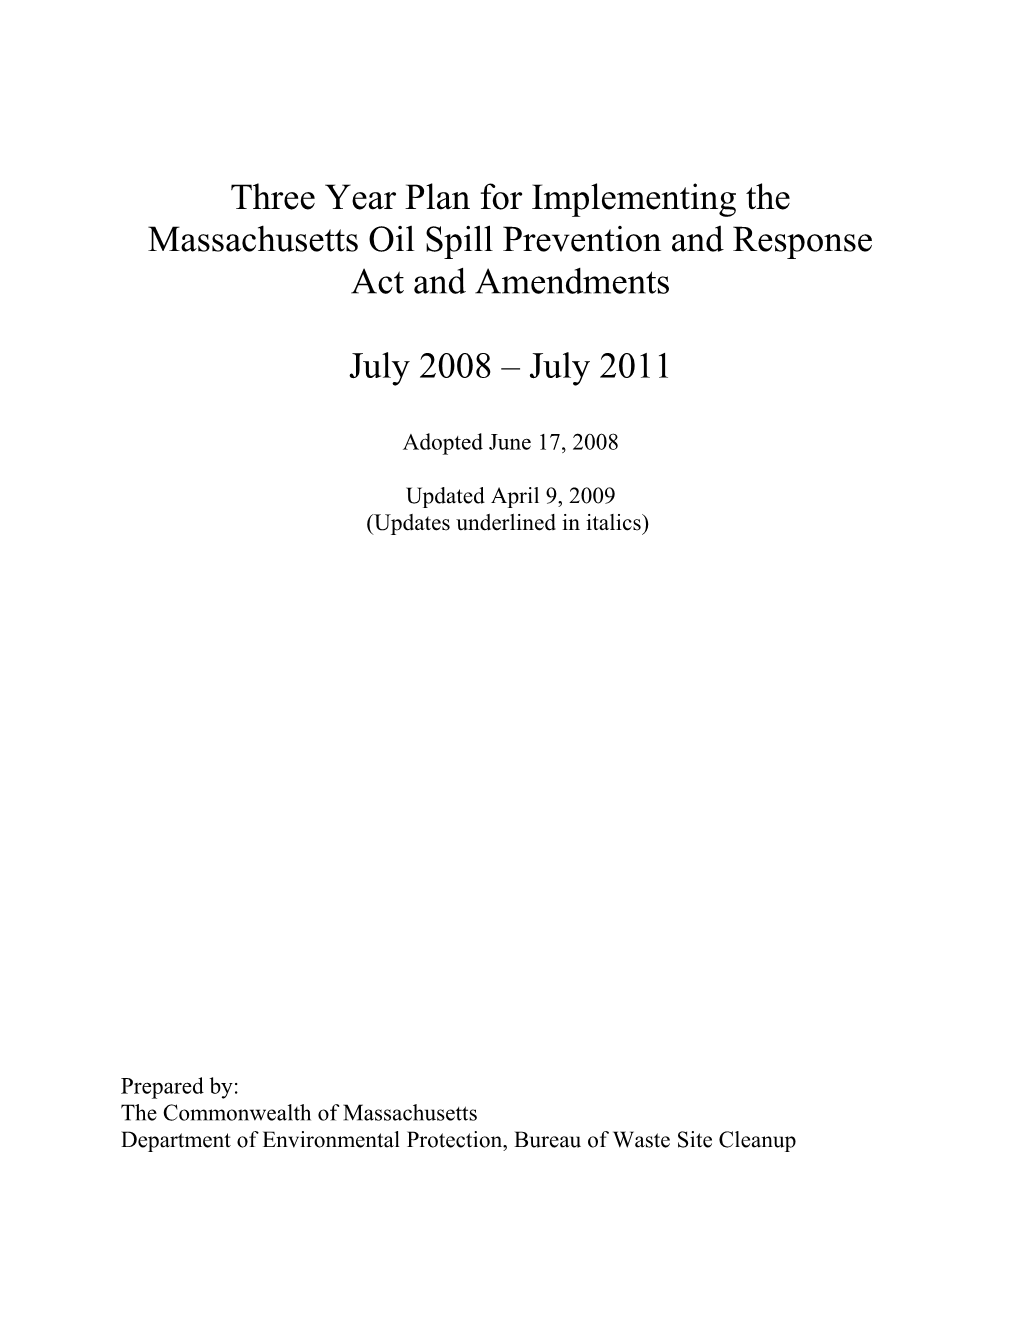 Three Year Plan for Implementing the Massachusetts Oil Spill Prevention and Response Act